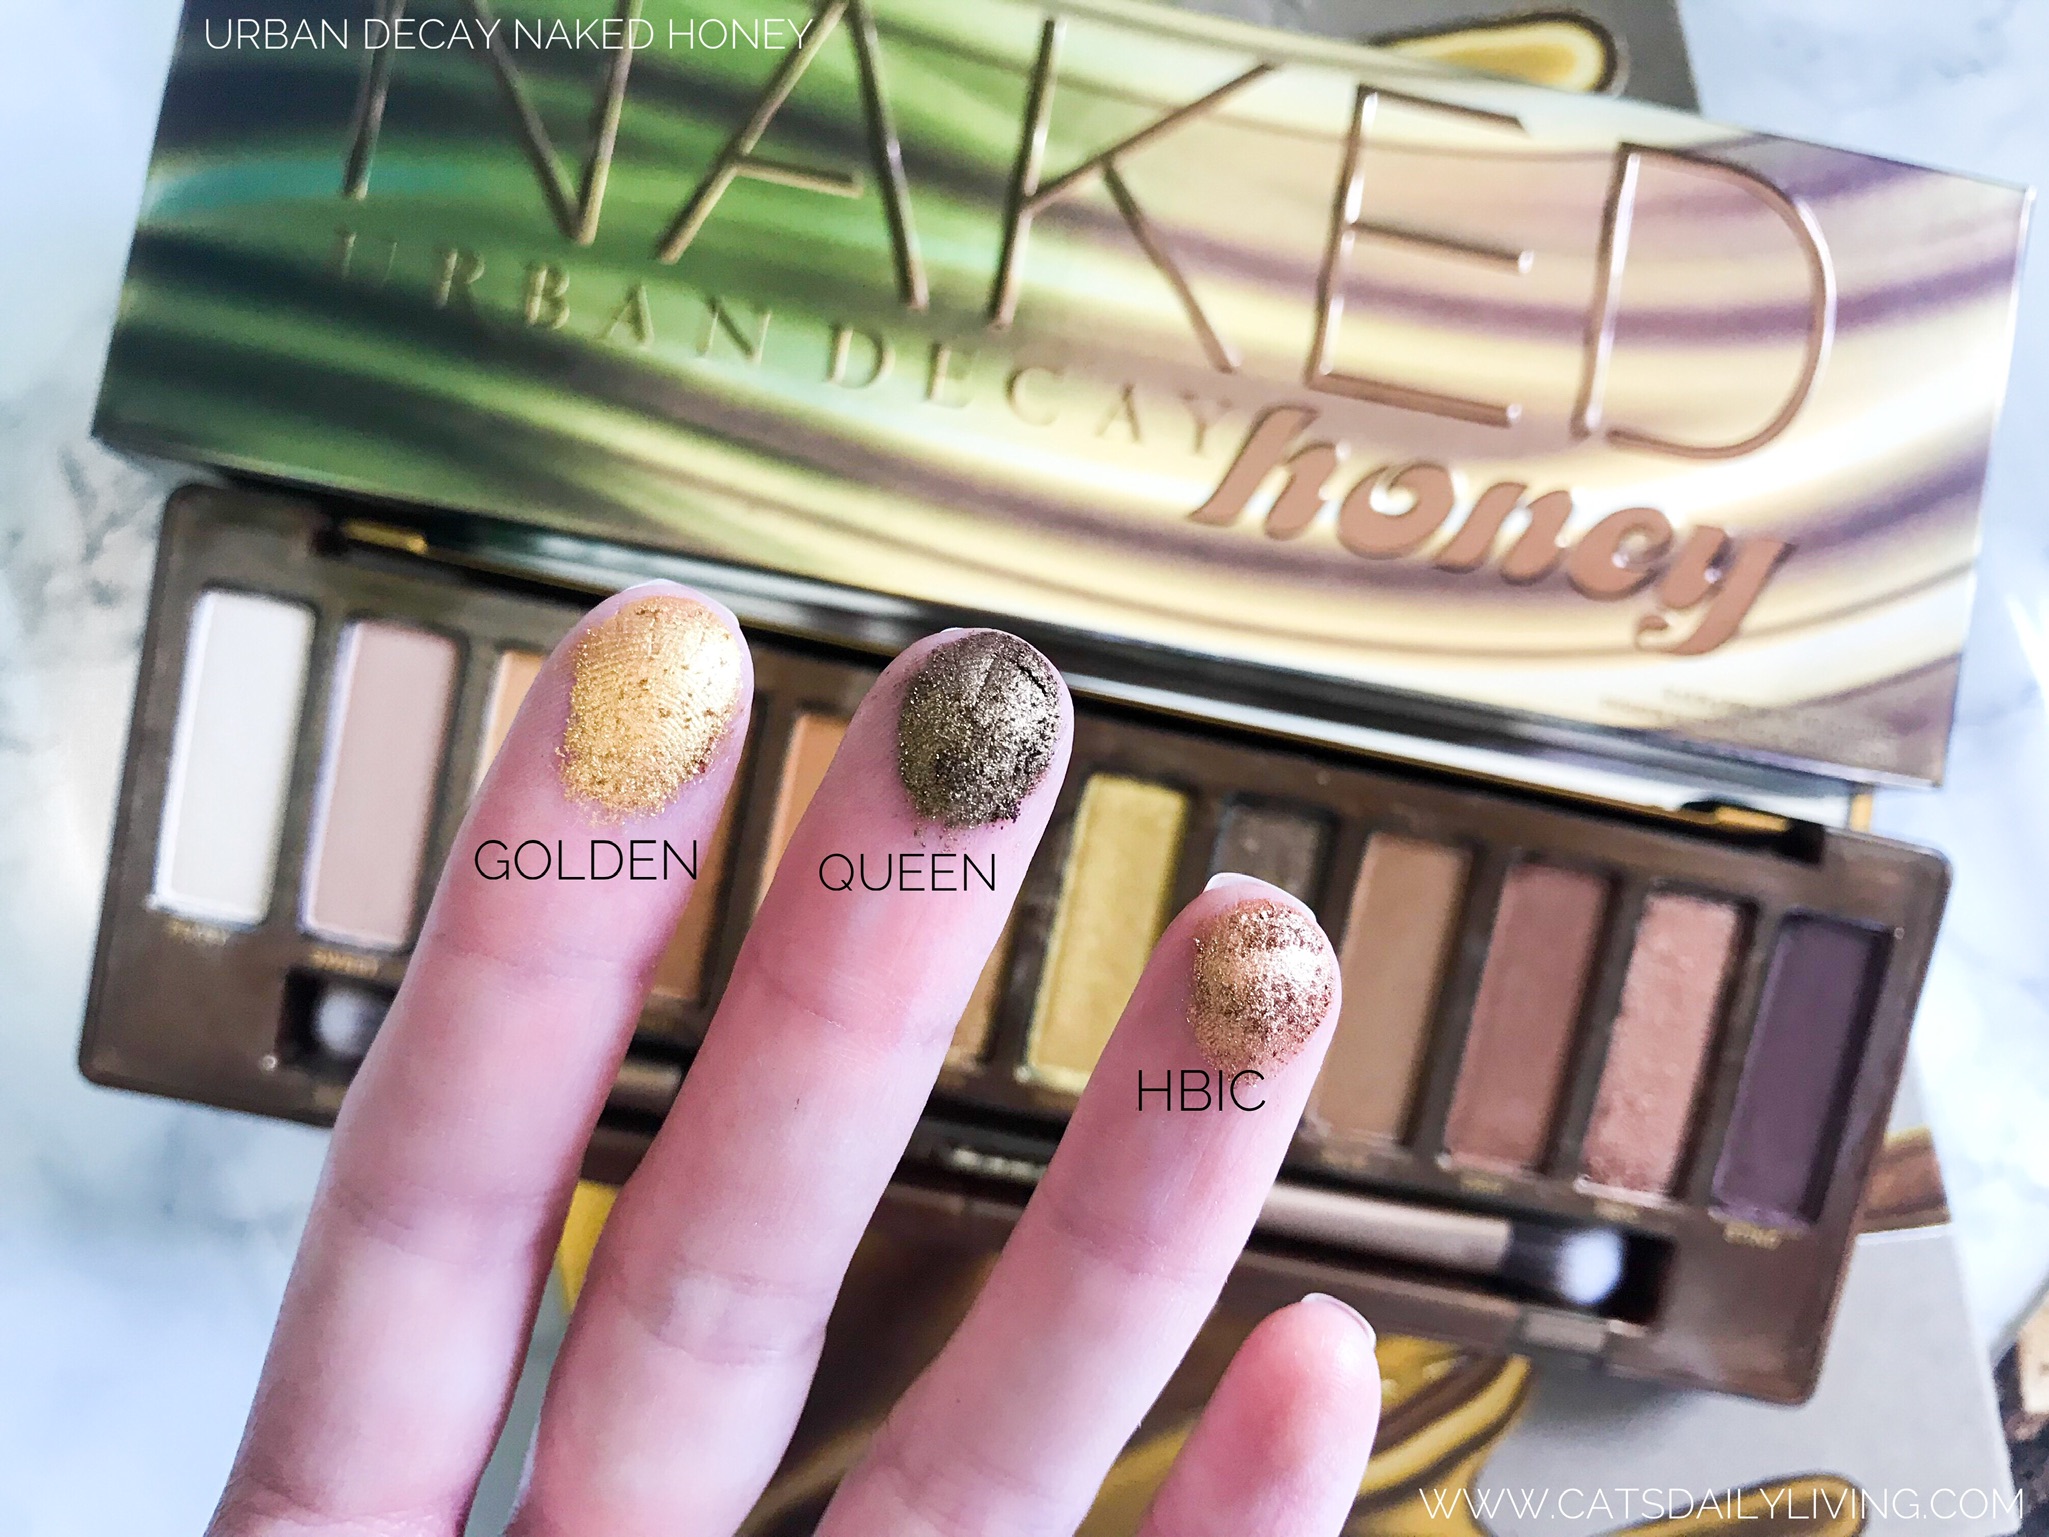 Urban Decay Naked Honey Eyeshadow Palette Review 